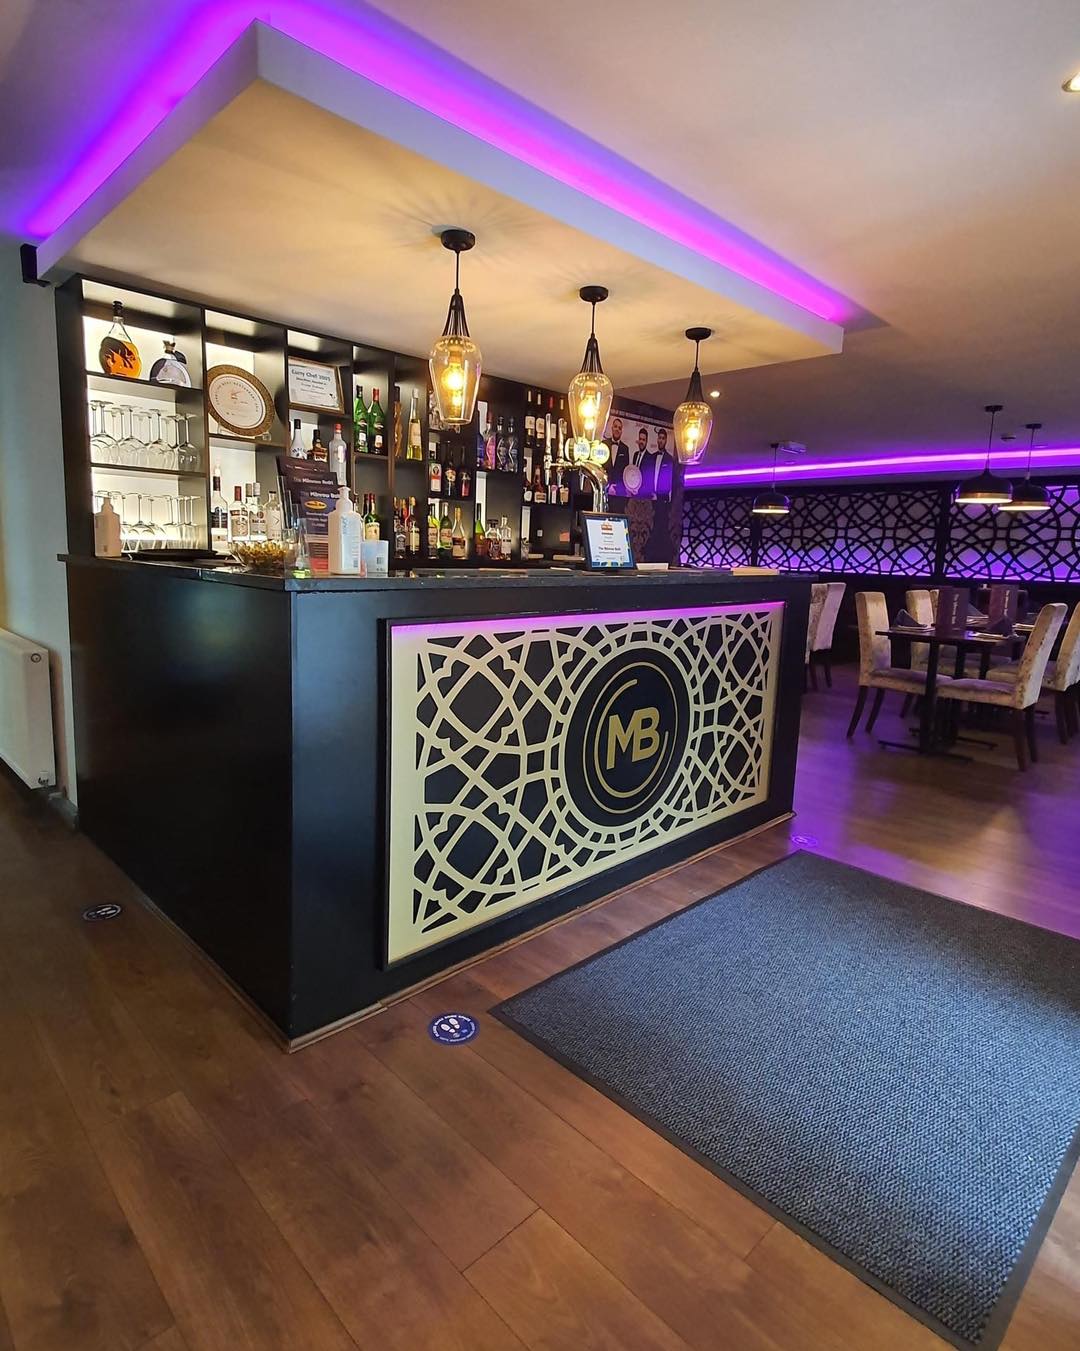 The Milnrow Balti Restaurant in Rochdale has been named the best Indian in the UK at the Asian Restaurant and Takeaway Awards 2023